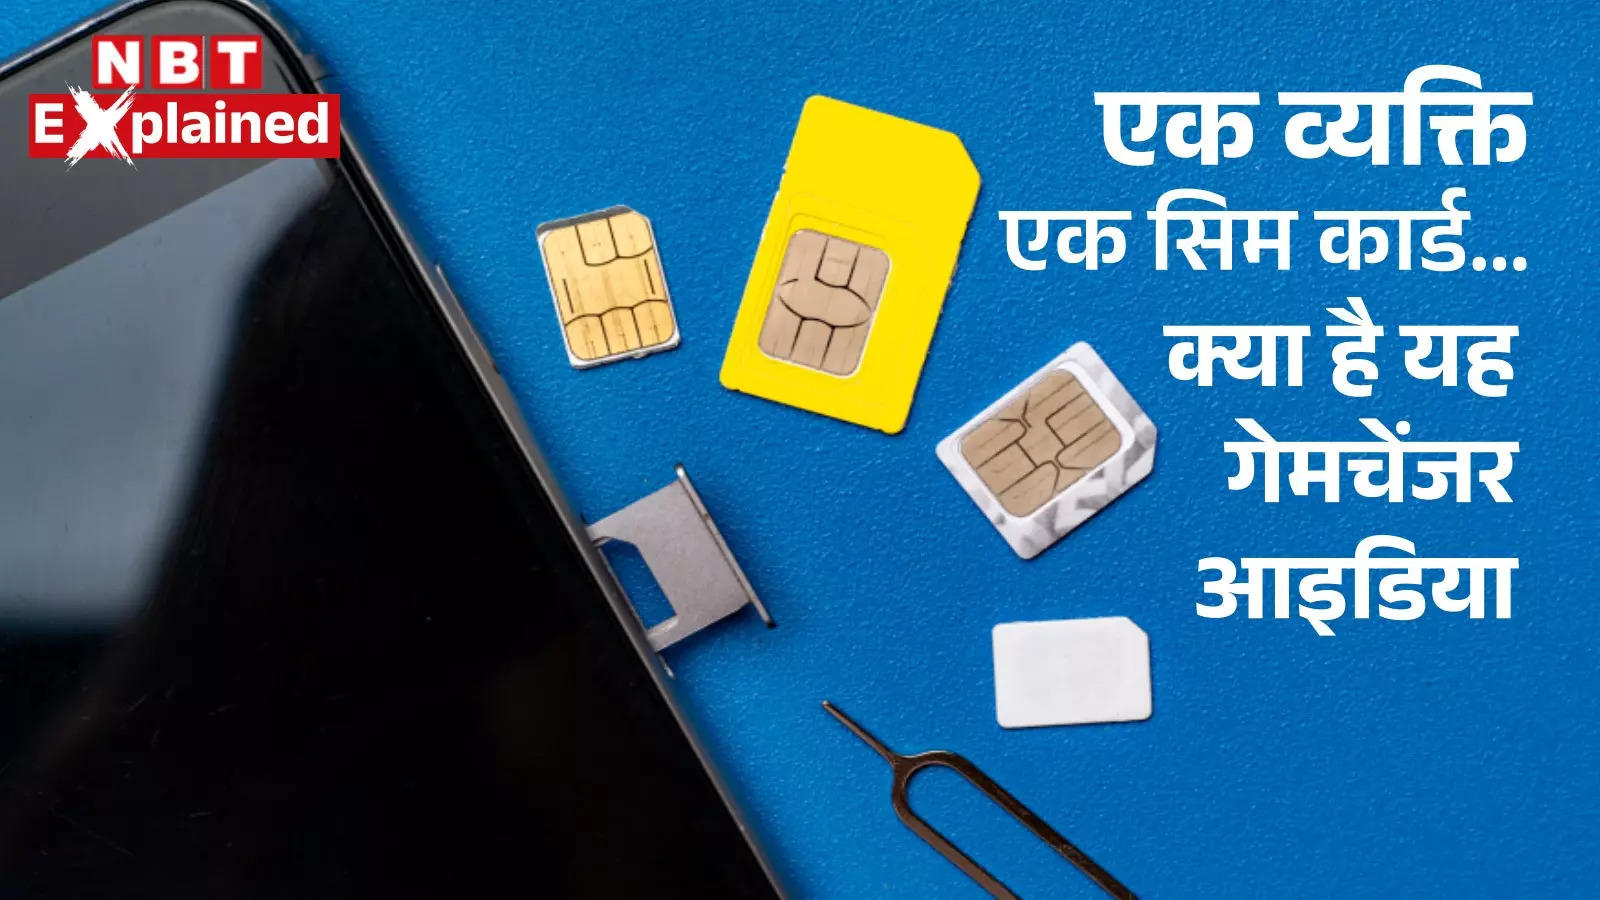 Only one SIM card for one person! Will this break the network of terrorists and stop black money?